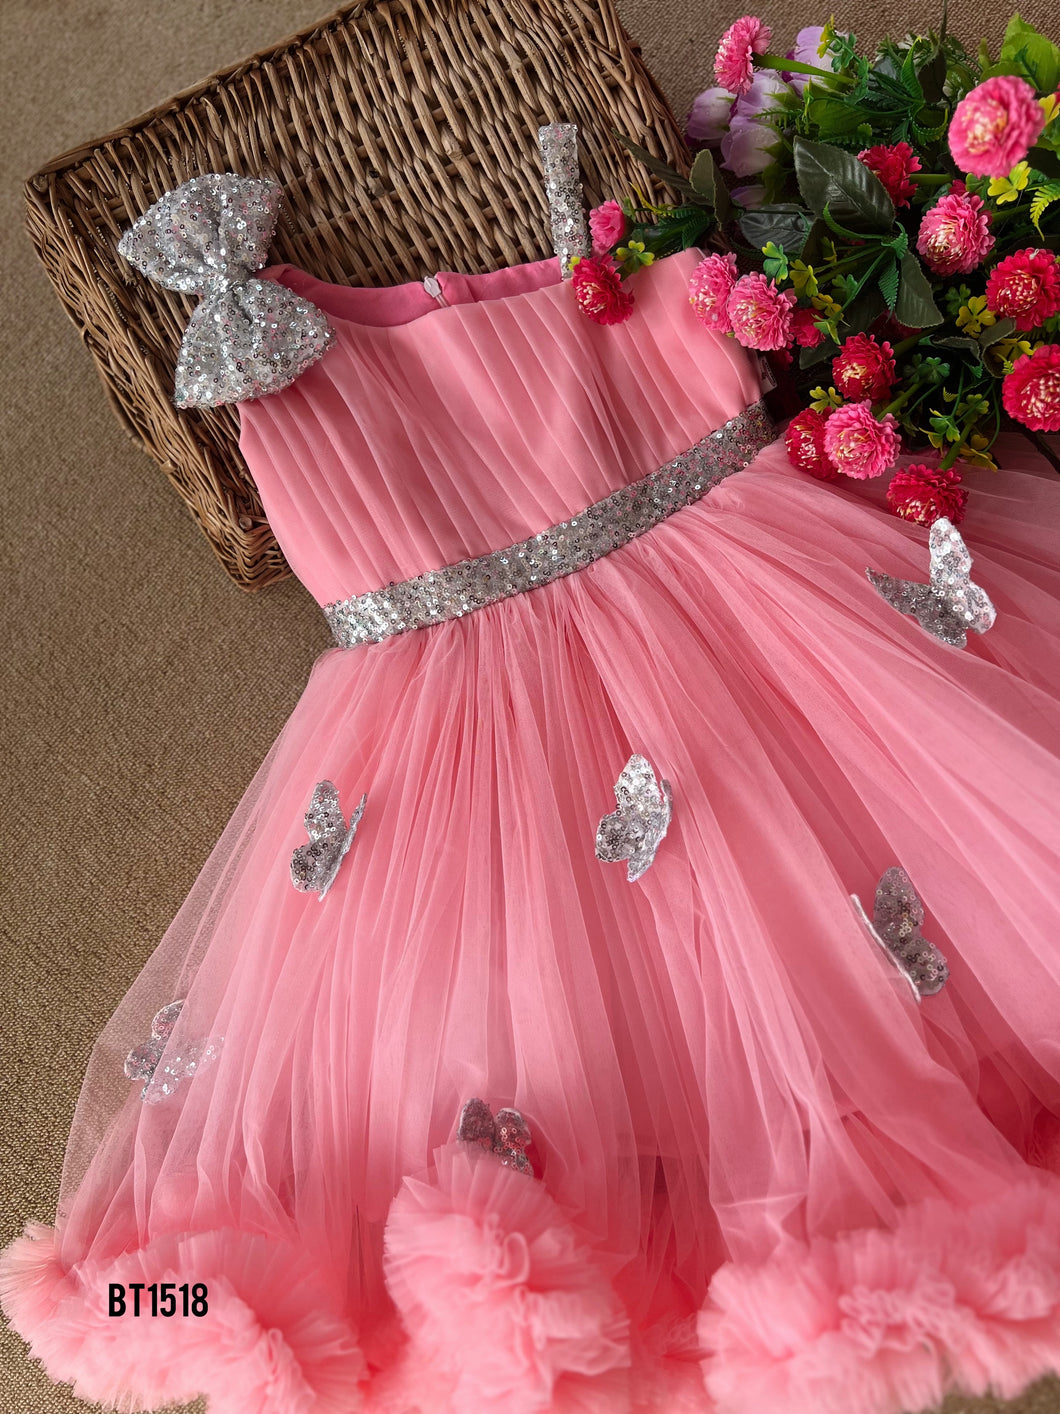 BT1518 Enchanted Party Dress - Butterfly Sparkle Edition